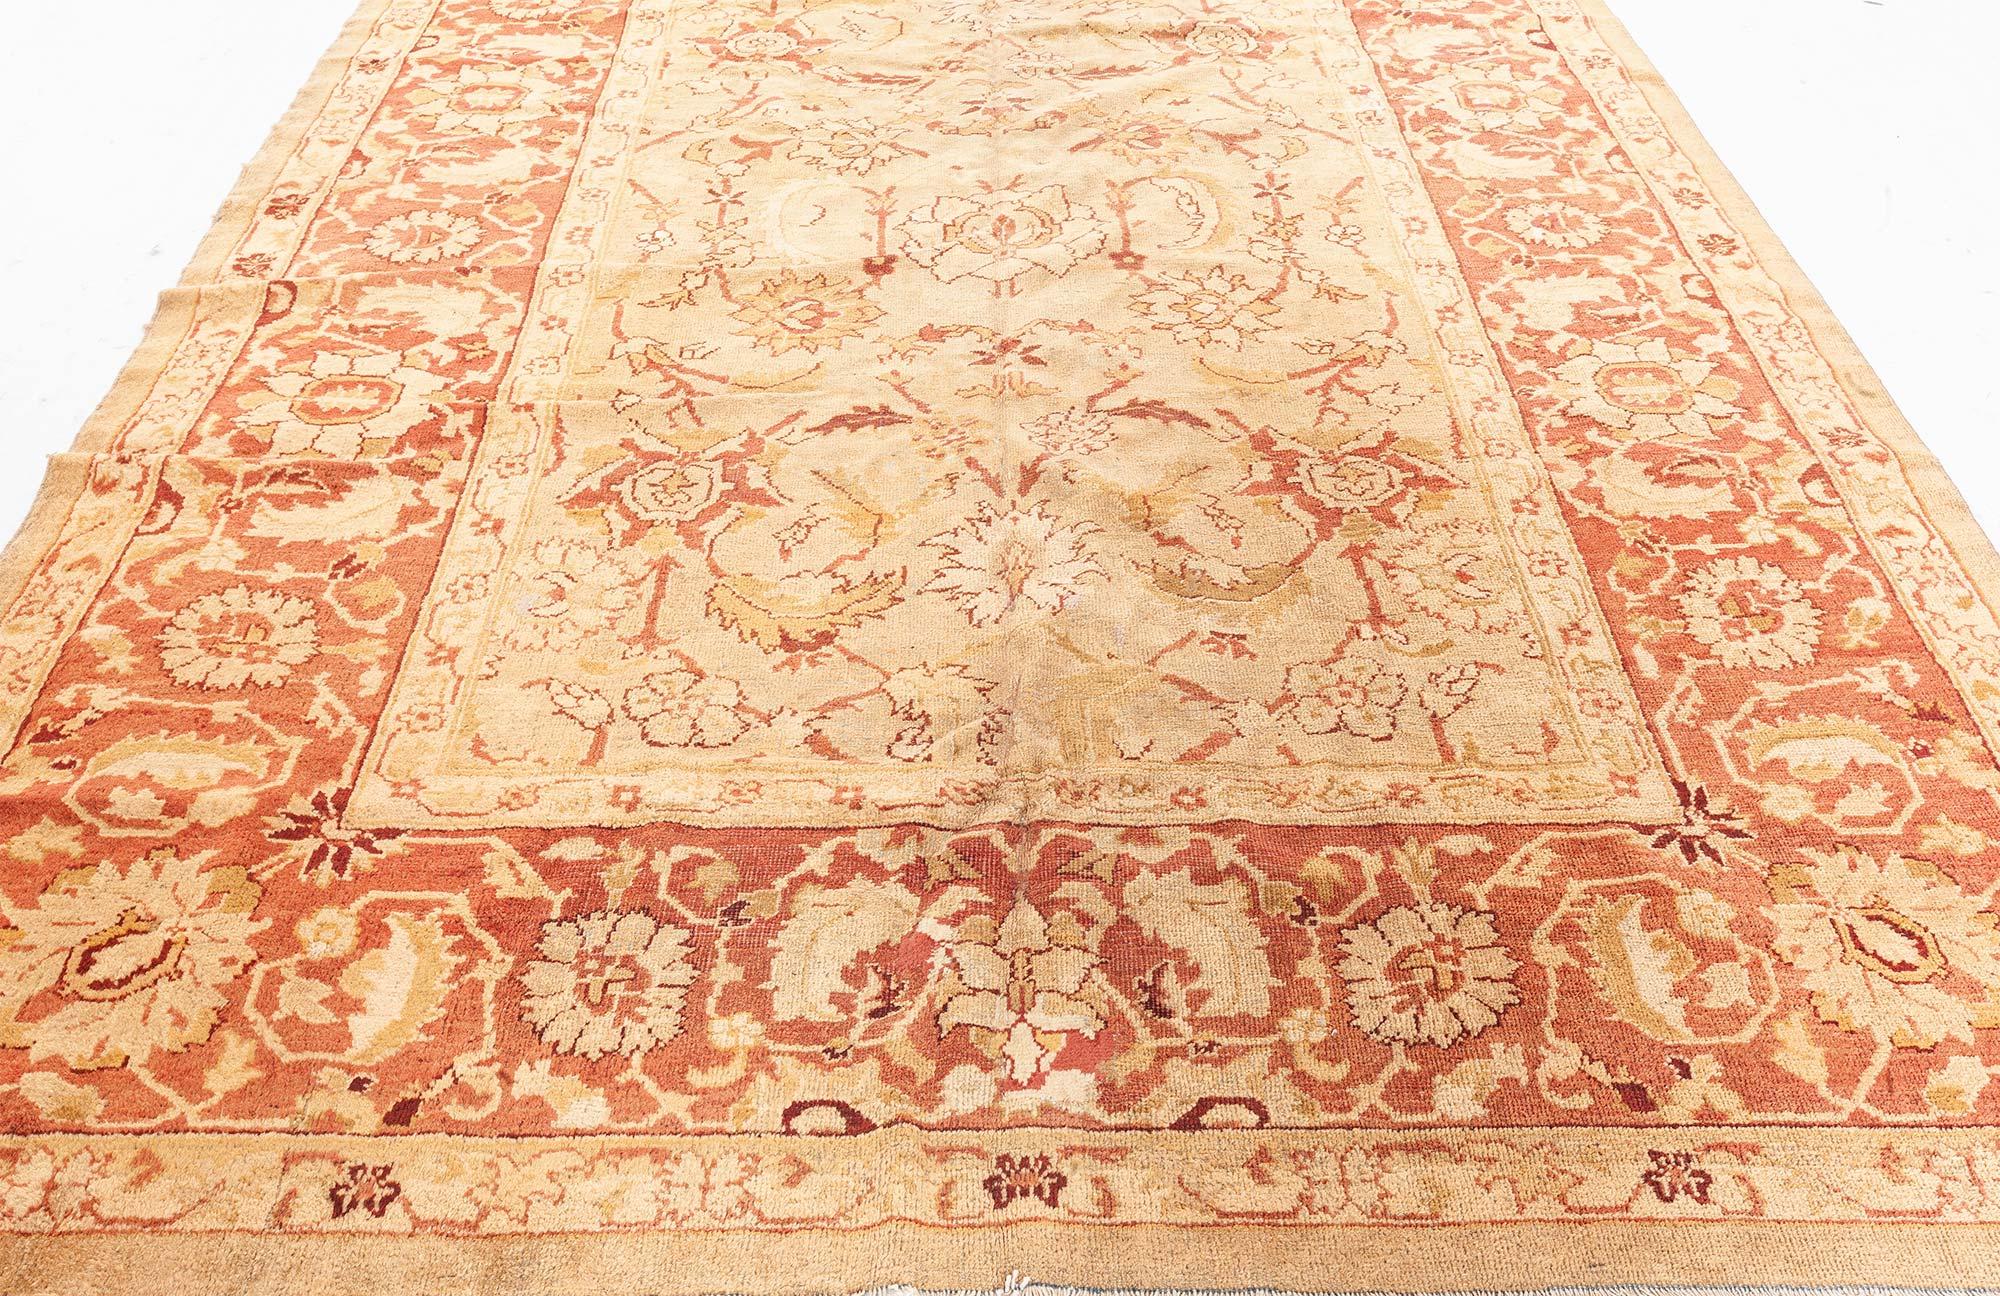 Vintage Botanic Indian Amritsar Carpet In Good Condition For Sale In New York, NY